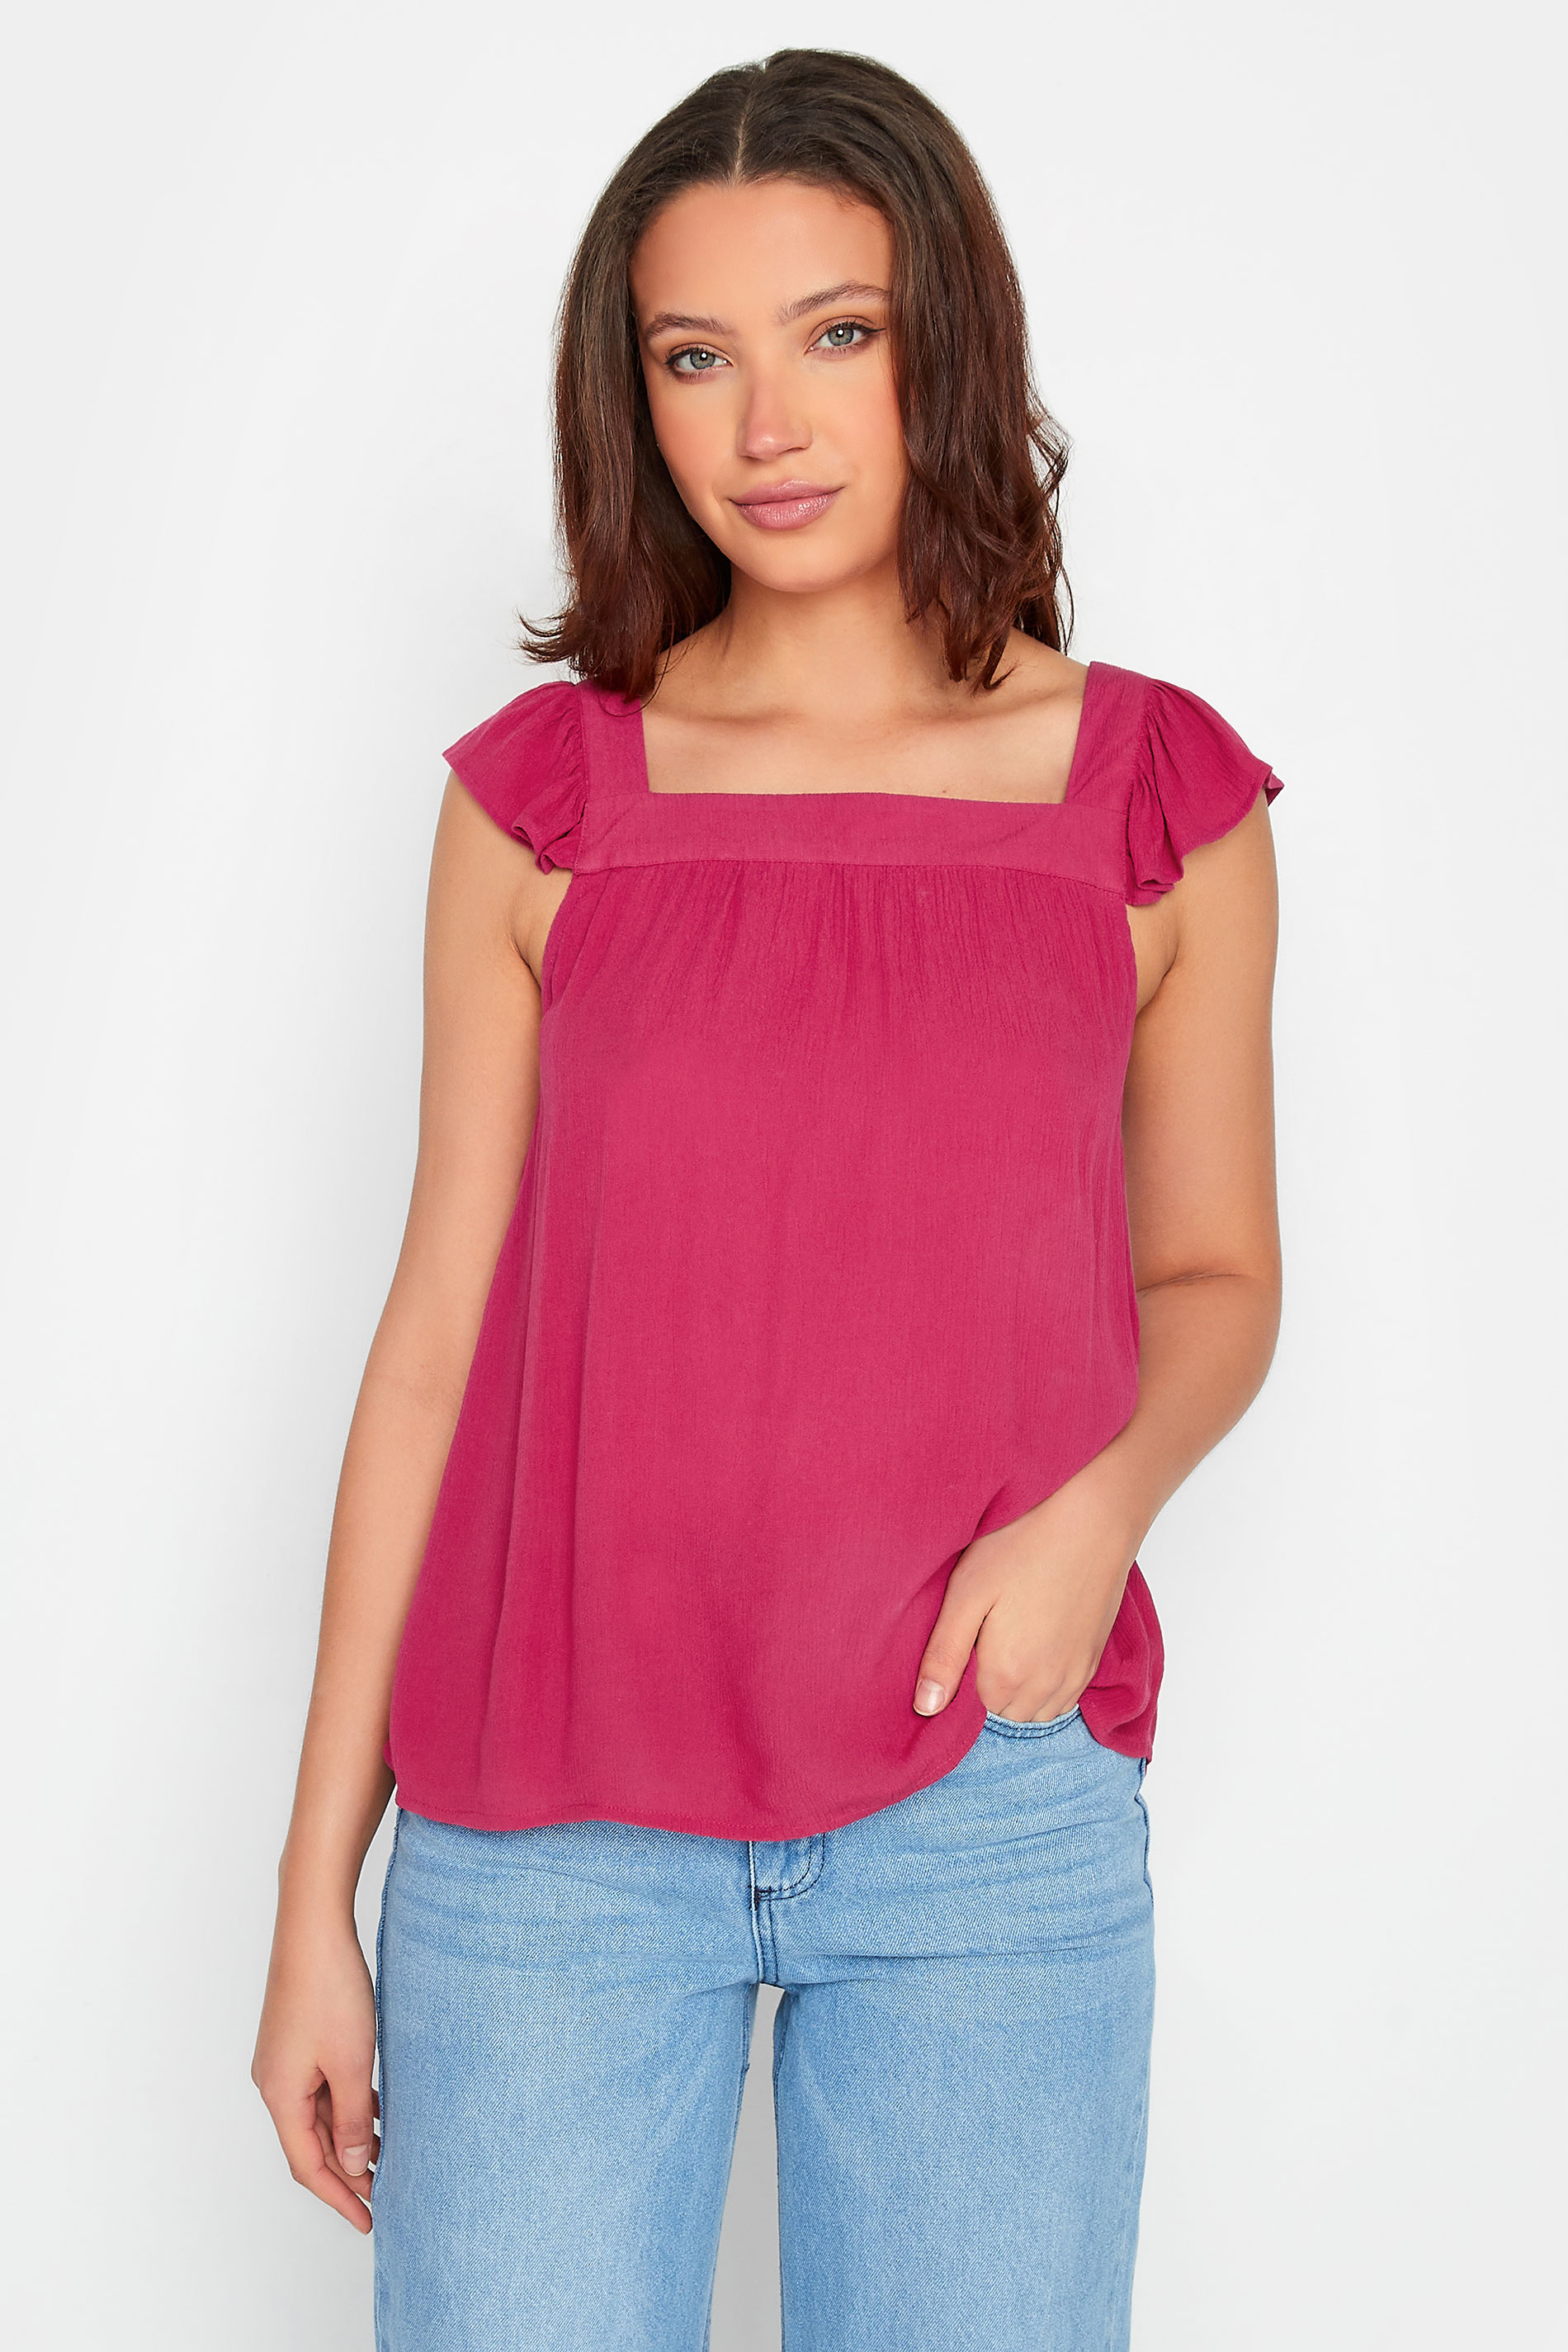 LTS Tall Women's Pink Crinkle Frill Top | Long Tall Sally 1